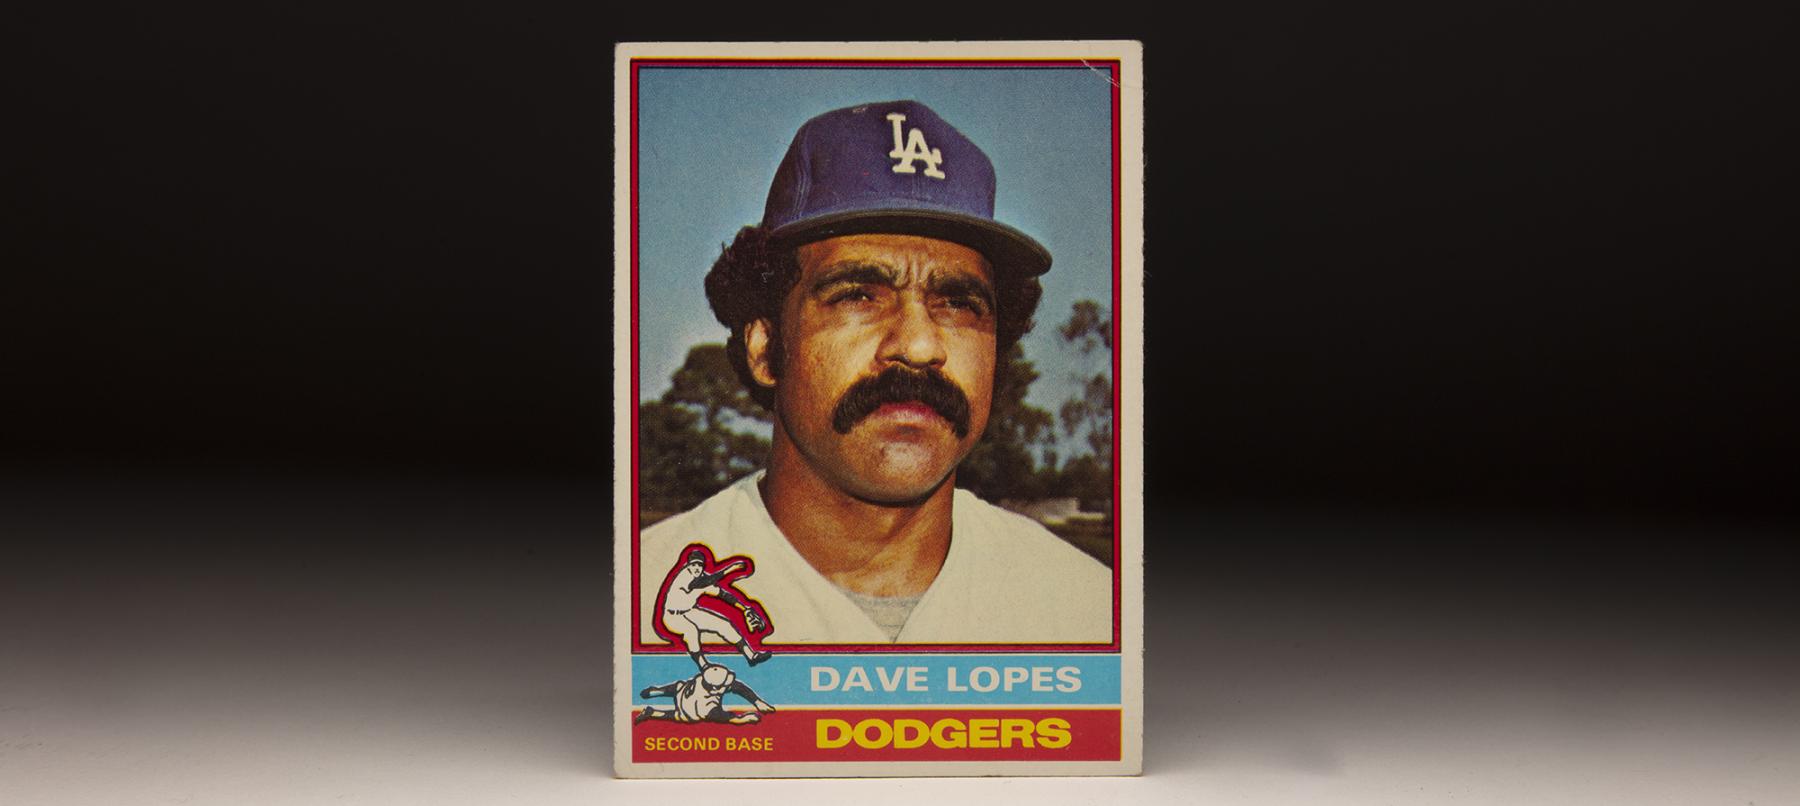 Baseball For The Love Of The Game - Davey Lopes Second baseman